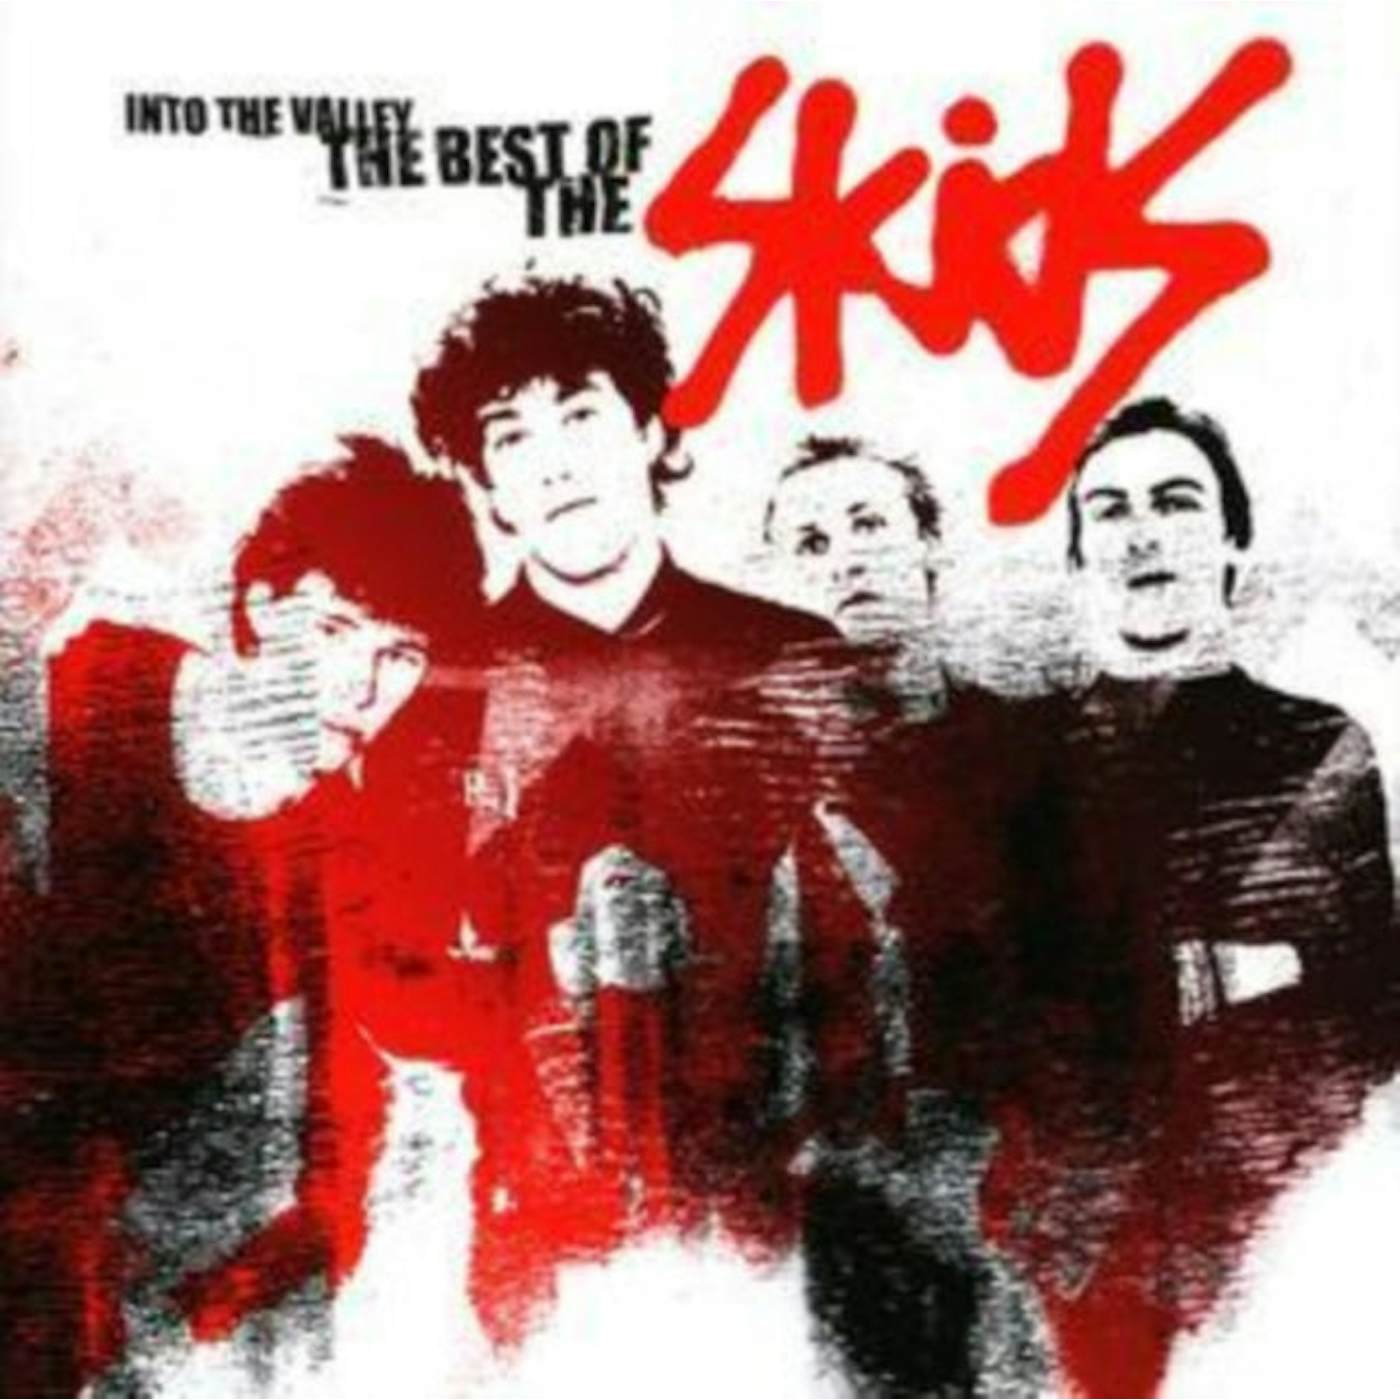 Skids CD - Into The Valley - The Best Of